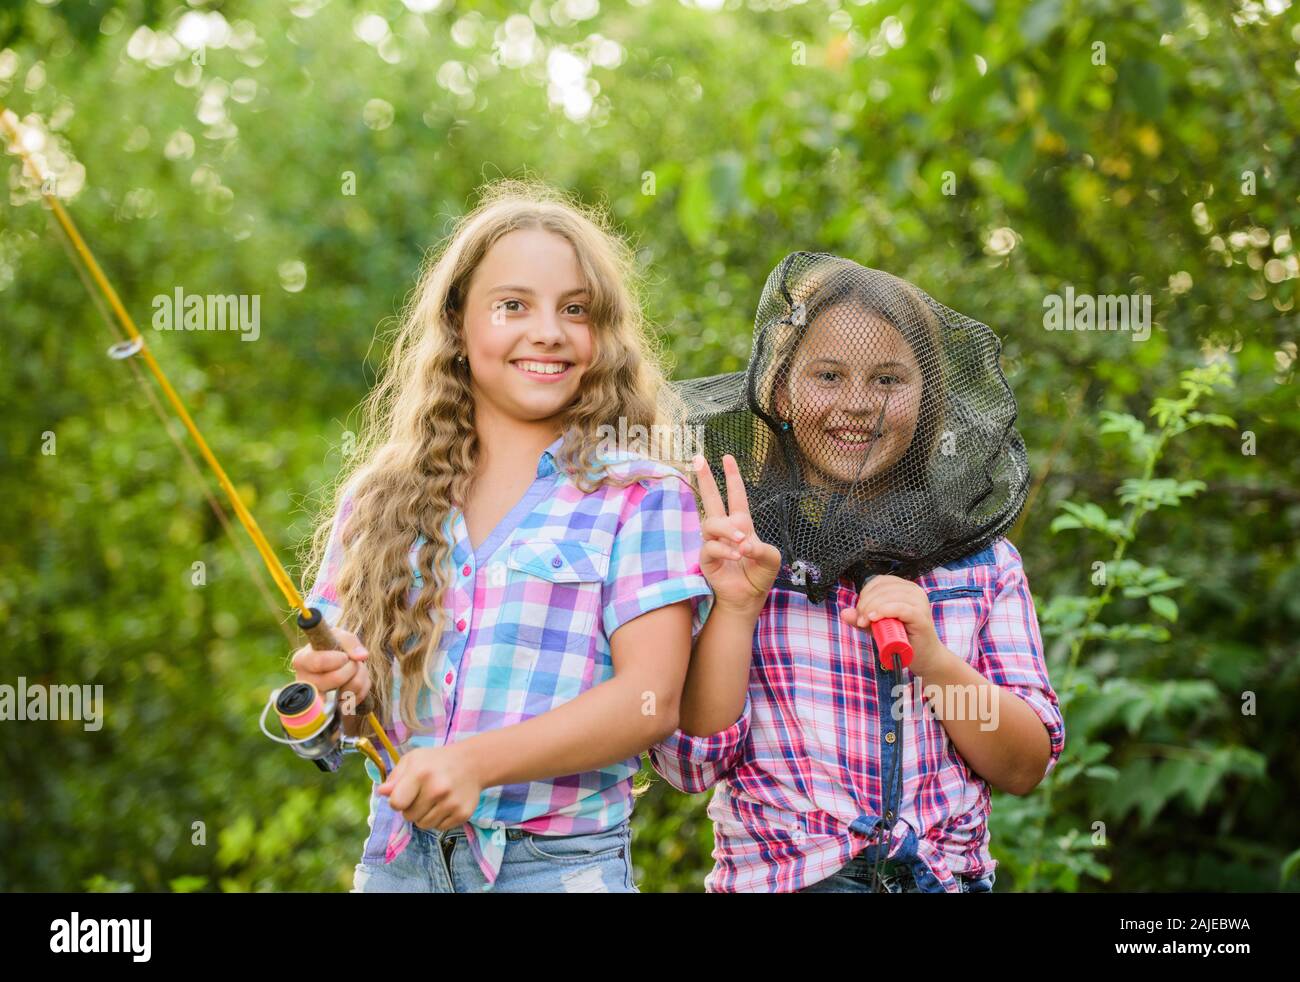 Having fun. Fly fishing. Kids spend time together fishing. Fishing skills.  Adorable girls nature background. Teamwork. Summer hobby. Happy smiling  children with net and rod. Happy childhood Stock Photo - Alamy